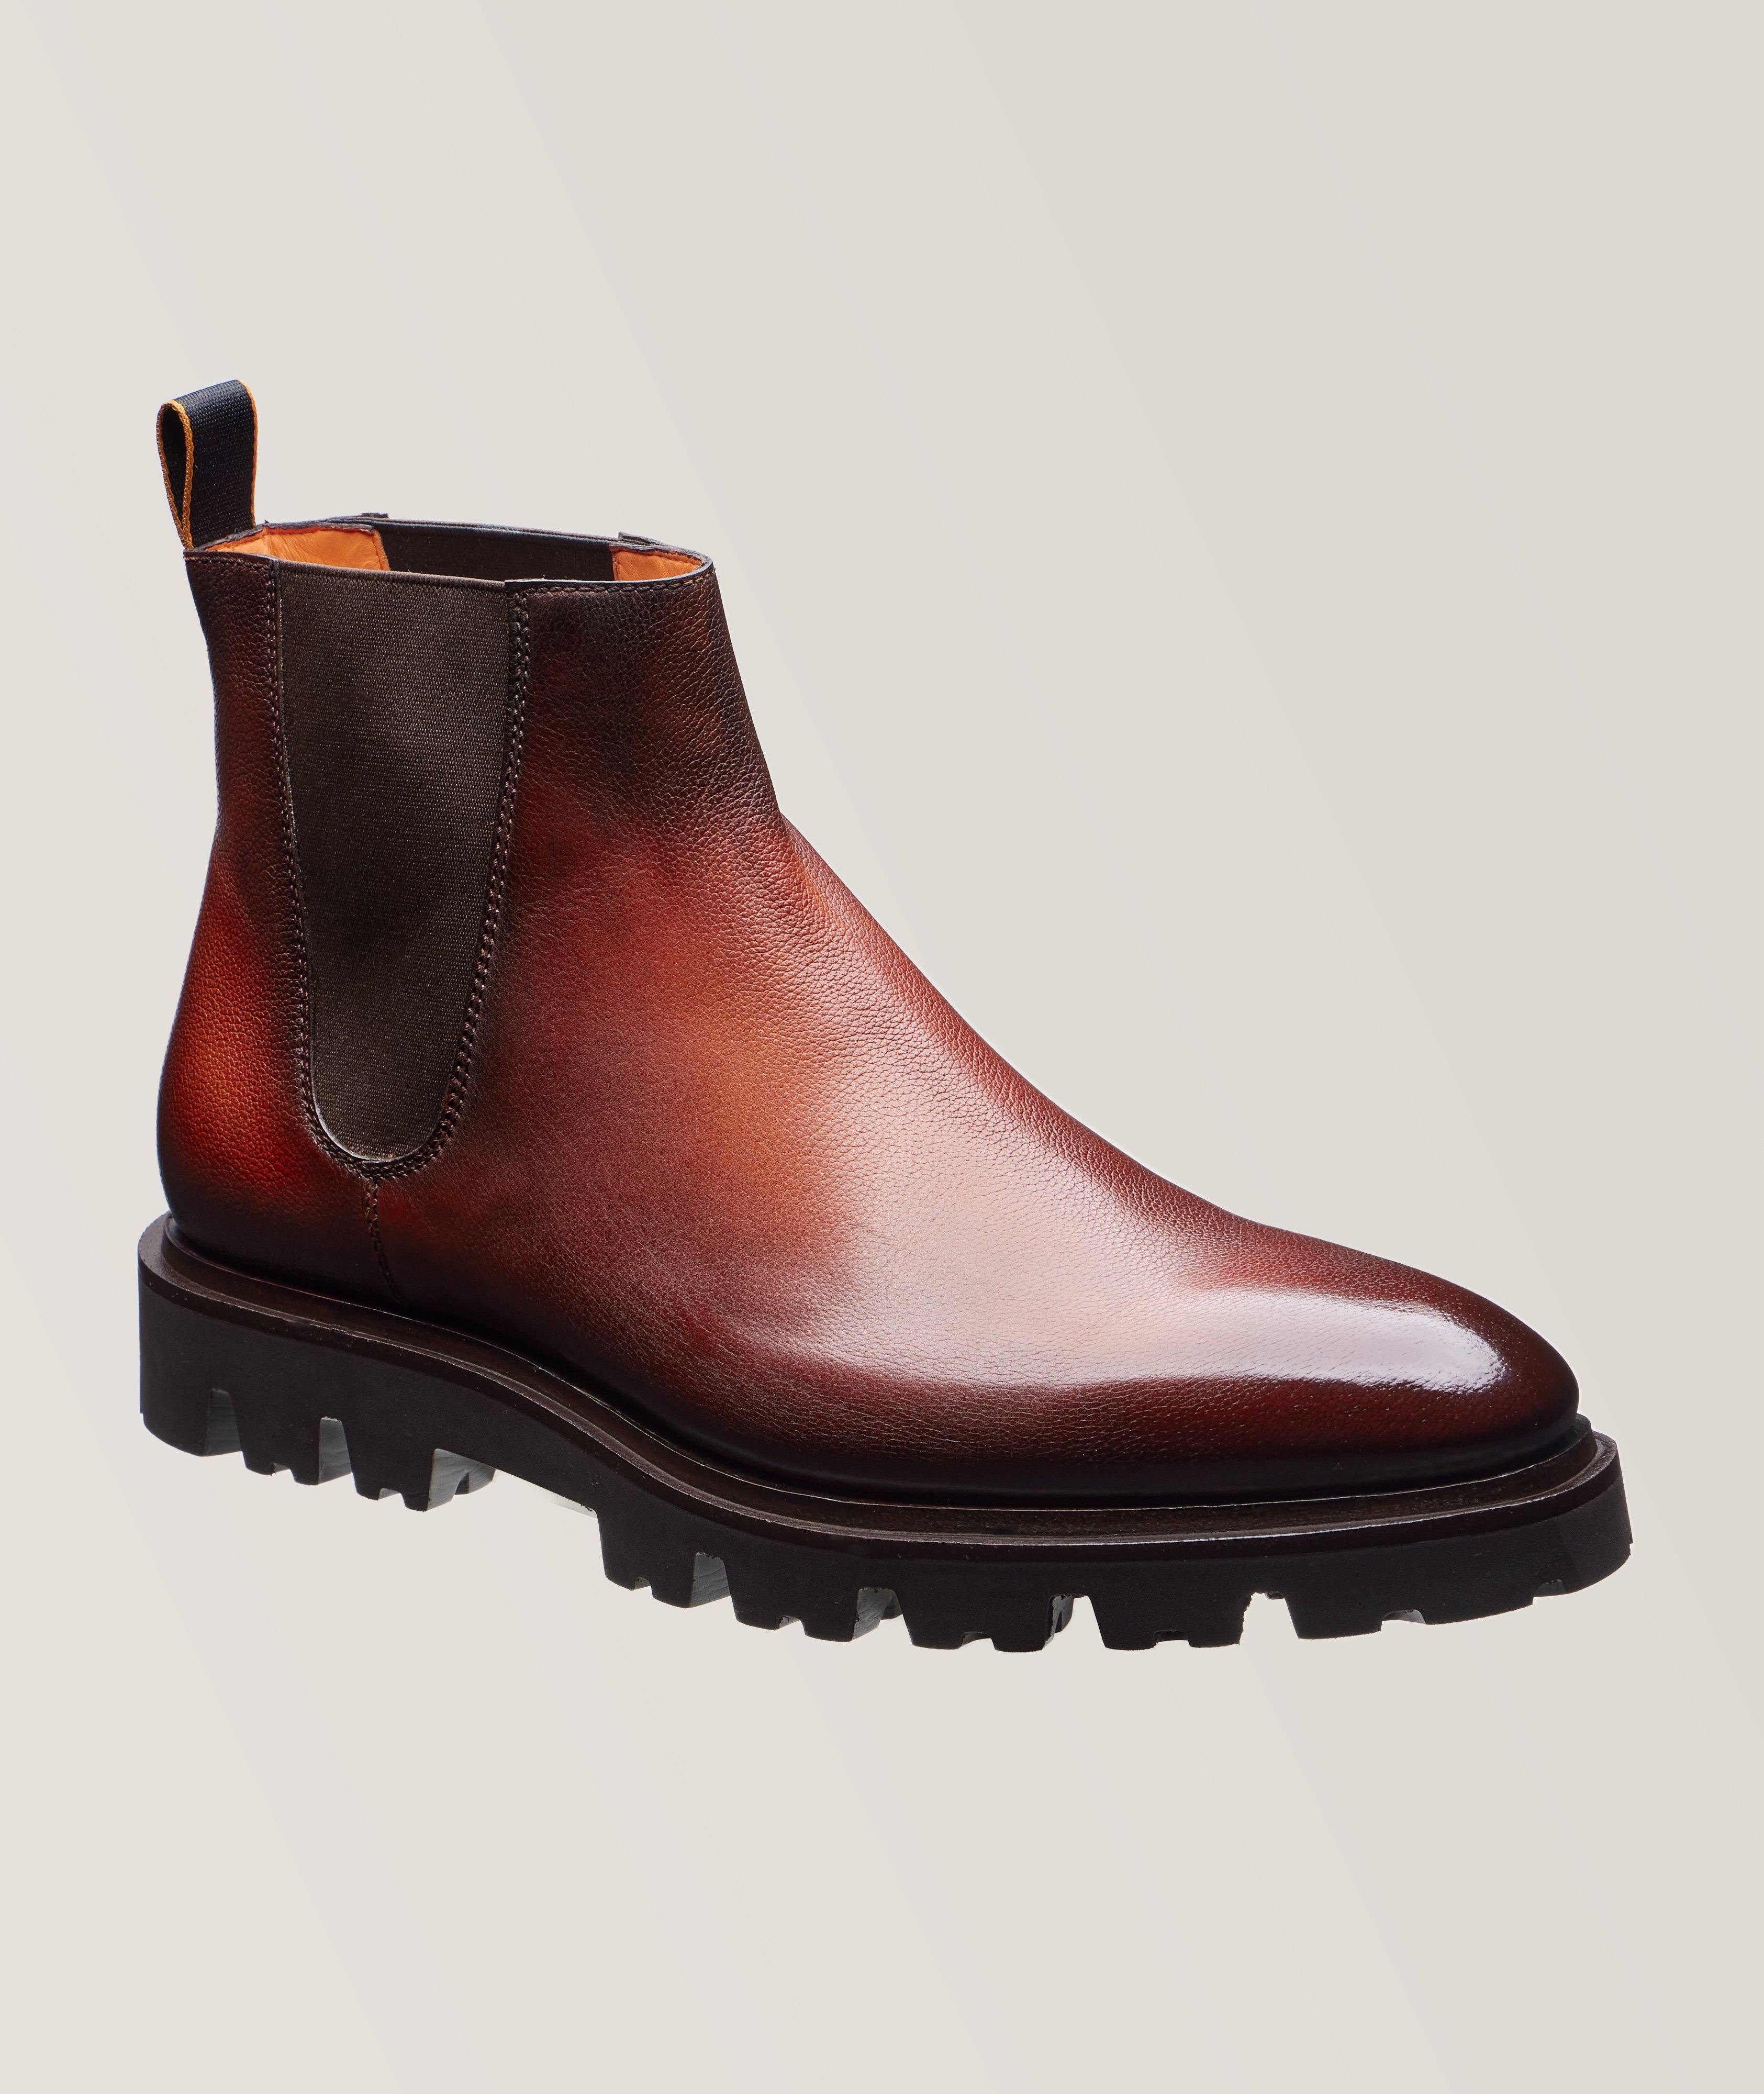 Burnished Grained Leather Chelsea Boots image 0